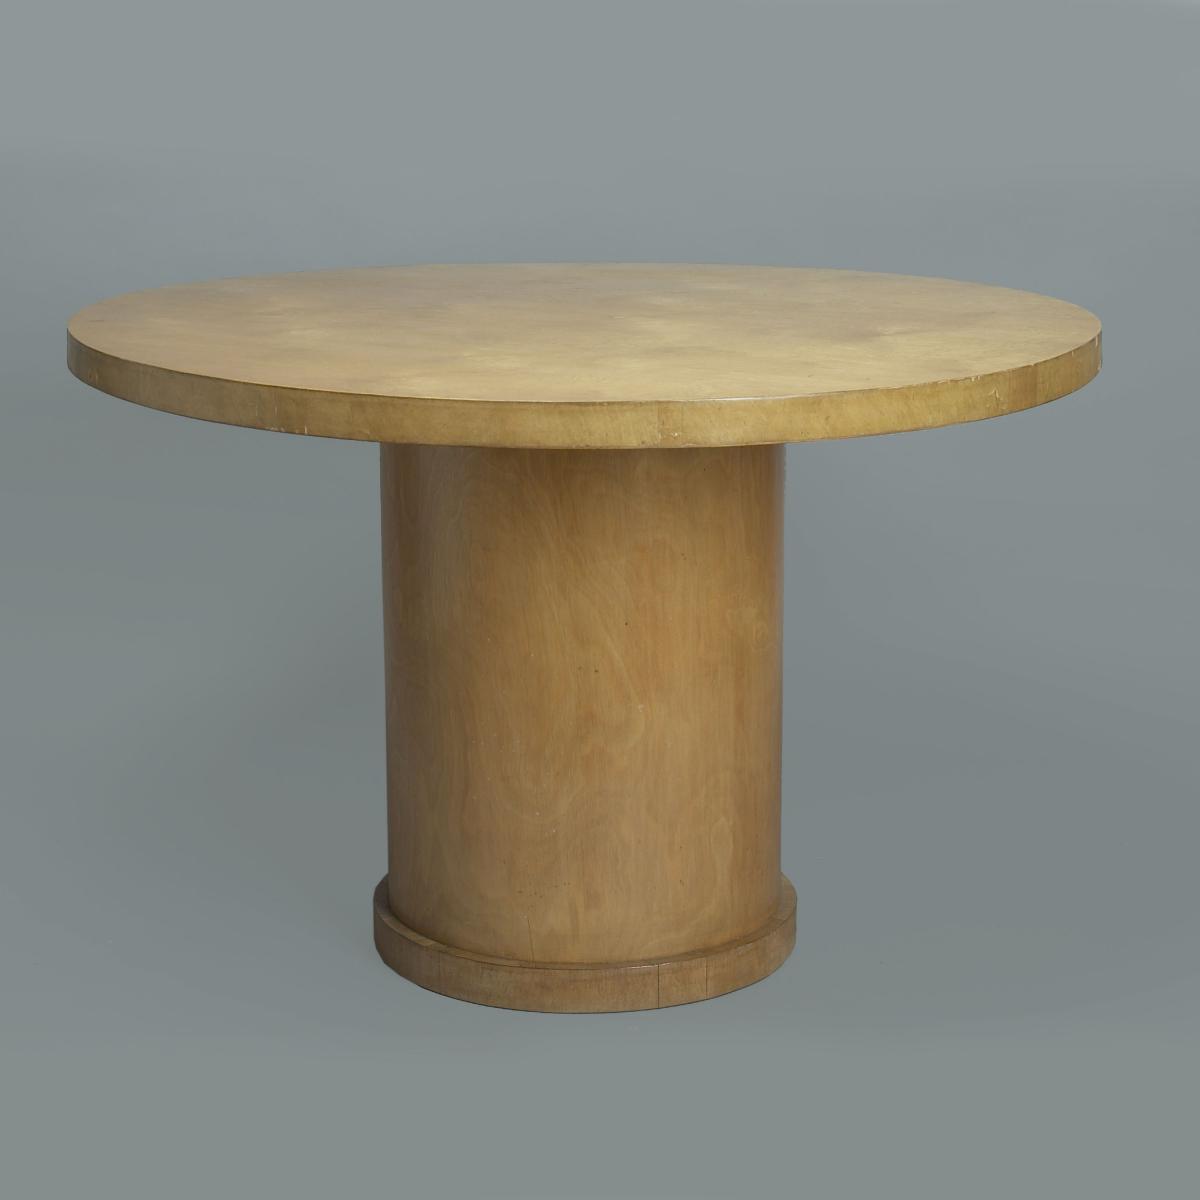 Gerald Summers Dining Table -  Made by Makers of Simple Furniture (1931-1940)